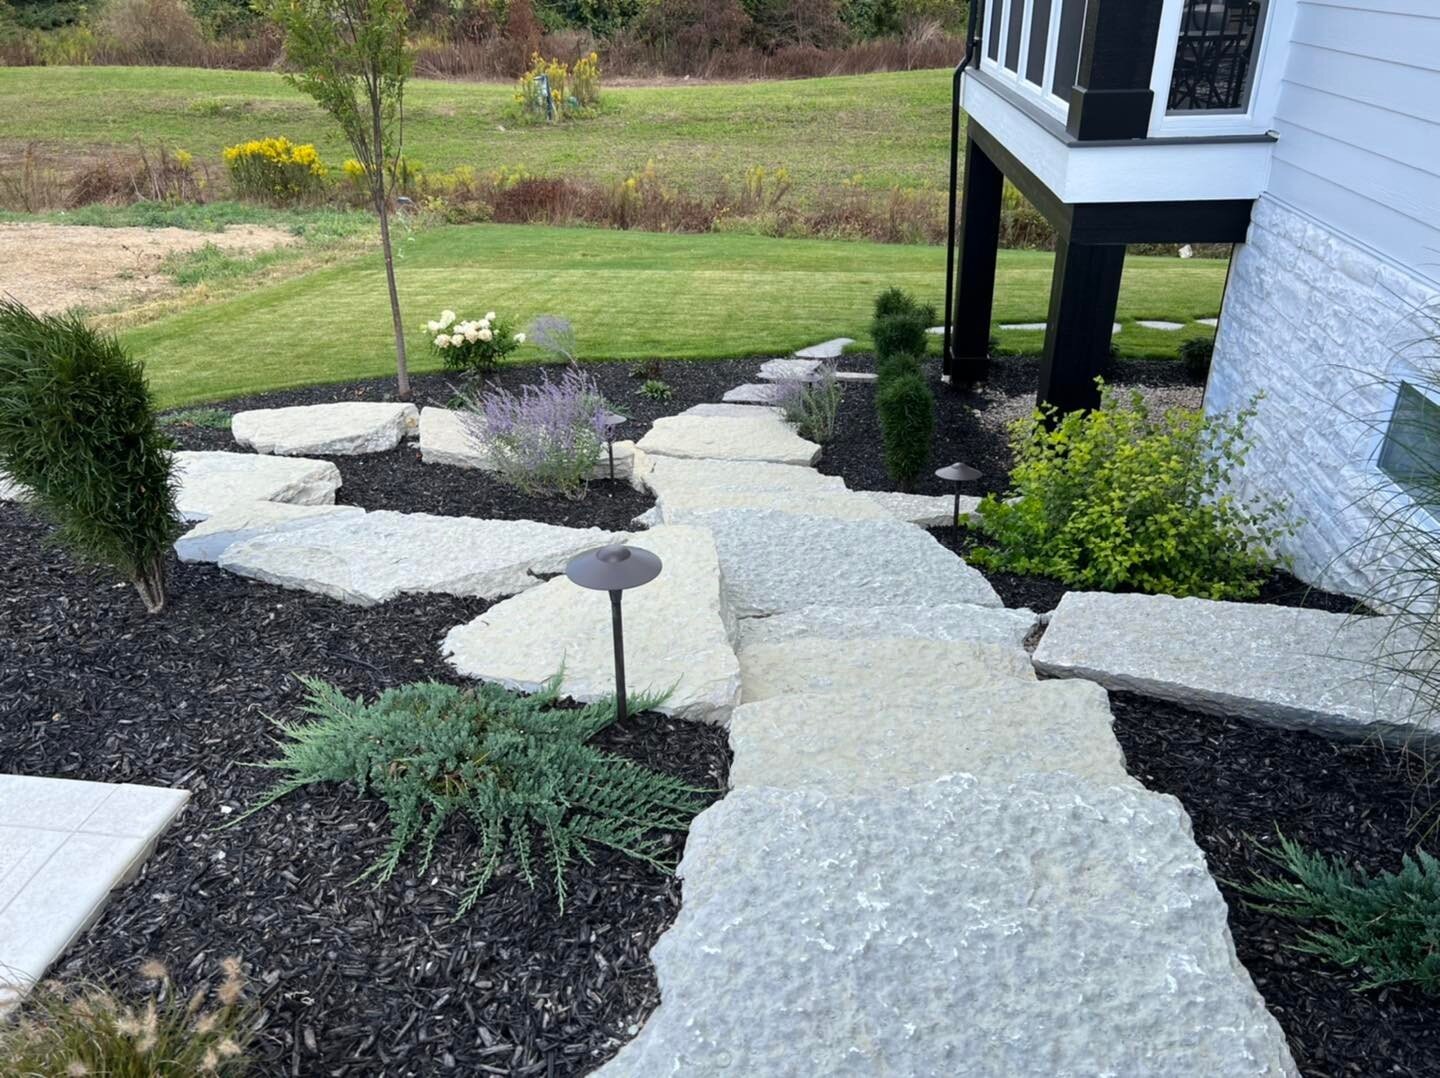 Step by step, we're turning dreams into reality. Our charming rock steps and paths pave the way to peaceful moments in your backyard sanctuary.

#backyarddesigns #stonepavers #landscapework #ciminellos #yarddesign #westervilleoh #westervilleohio #gar